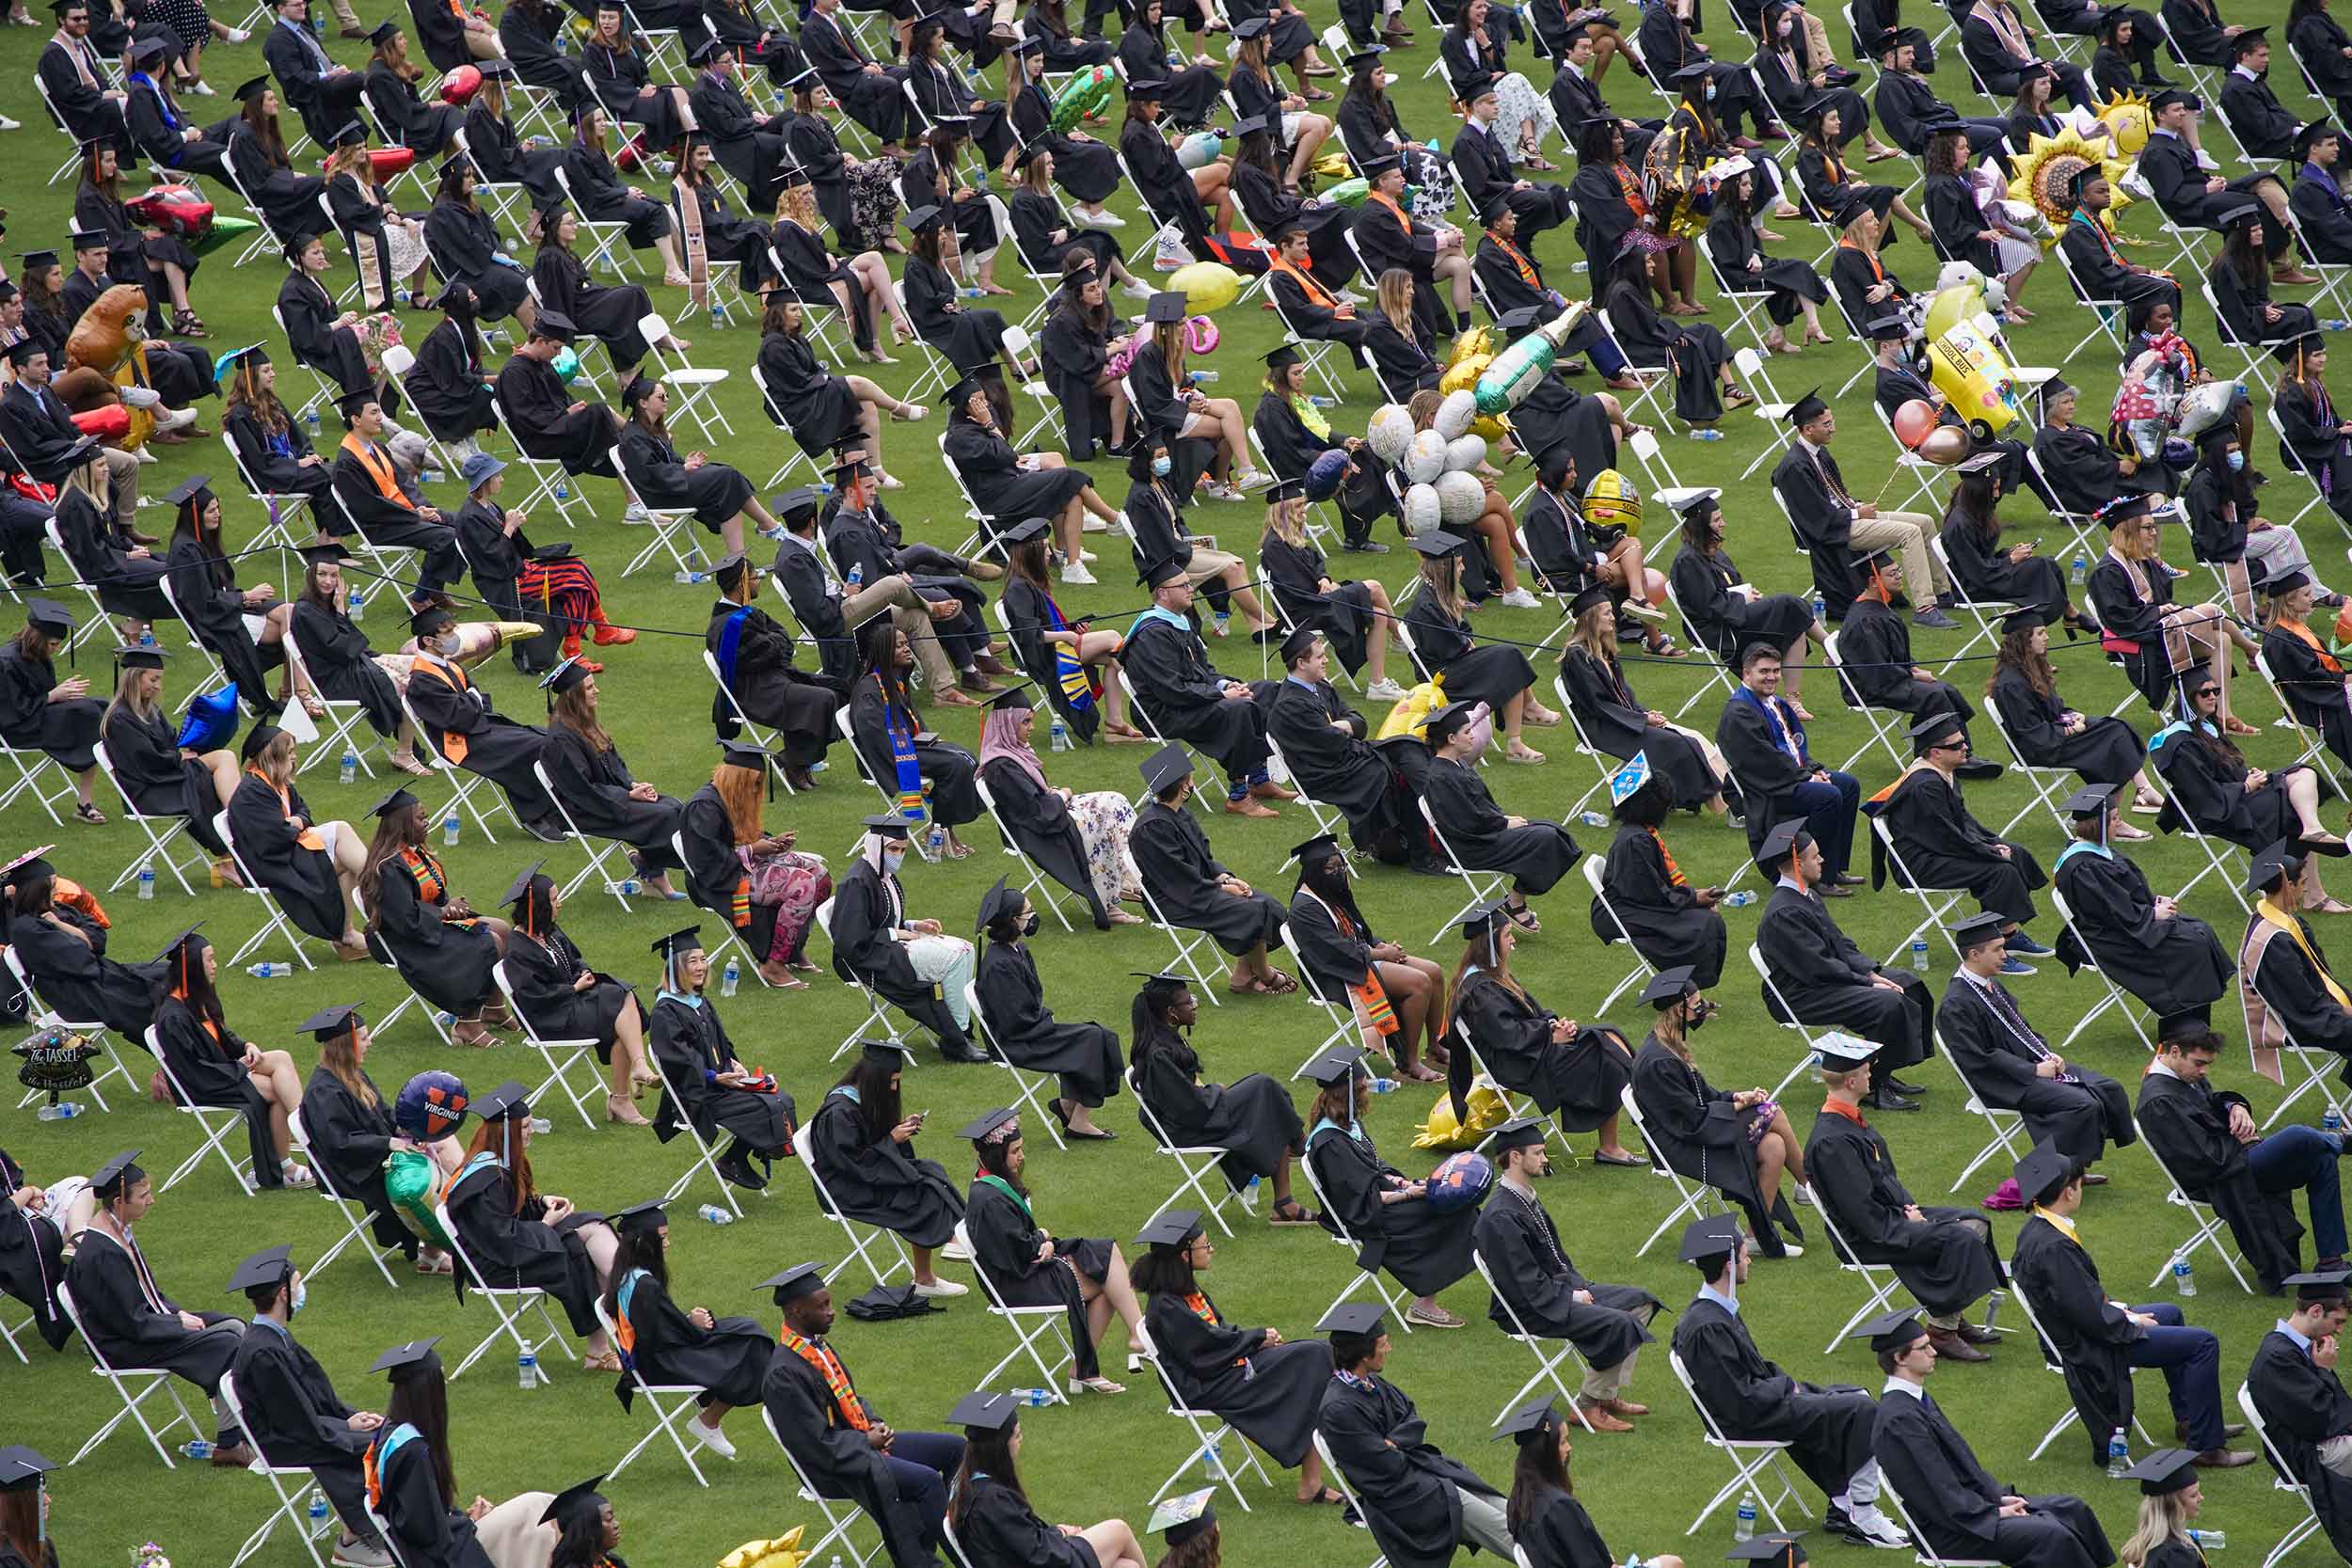 Graduates filled rows of chairs on the field, spaced apart in compliance with public health guidelines. (Photo by Sanjay Suchak, University Communications)